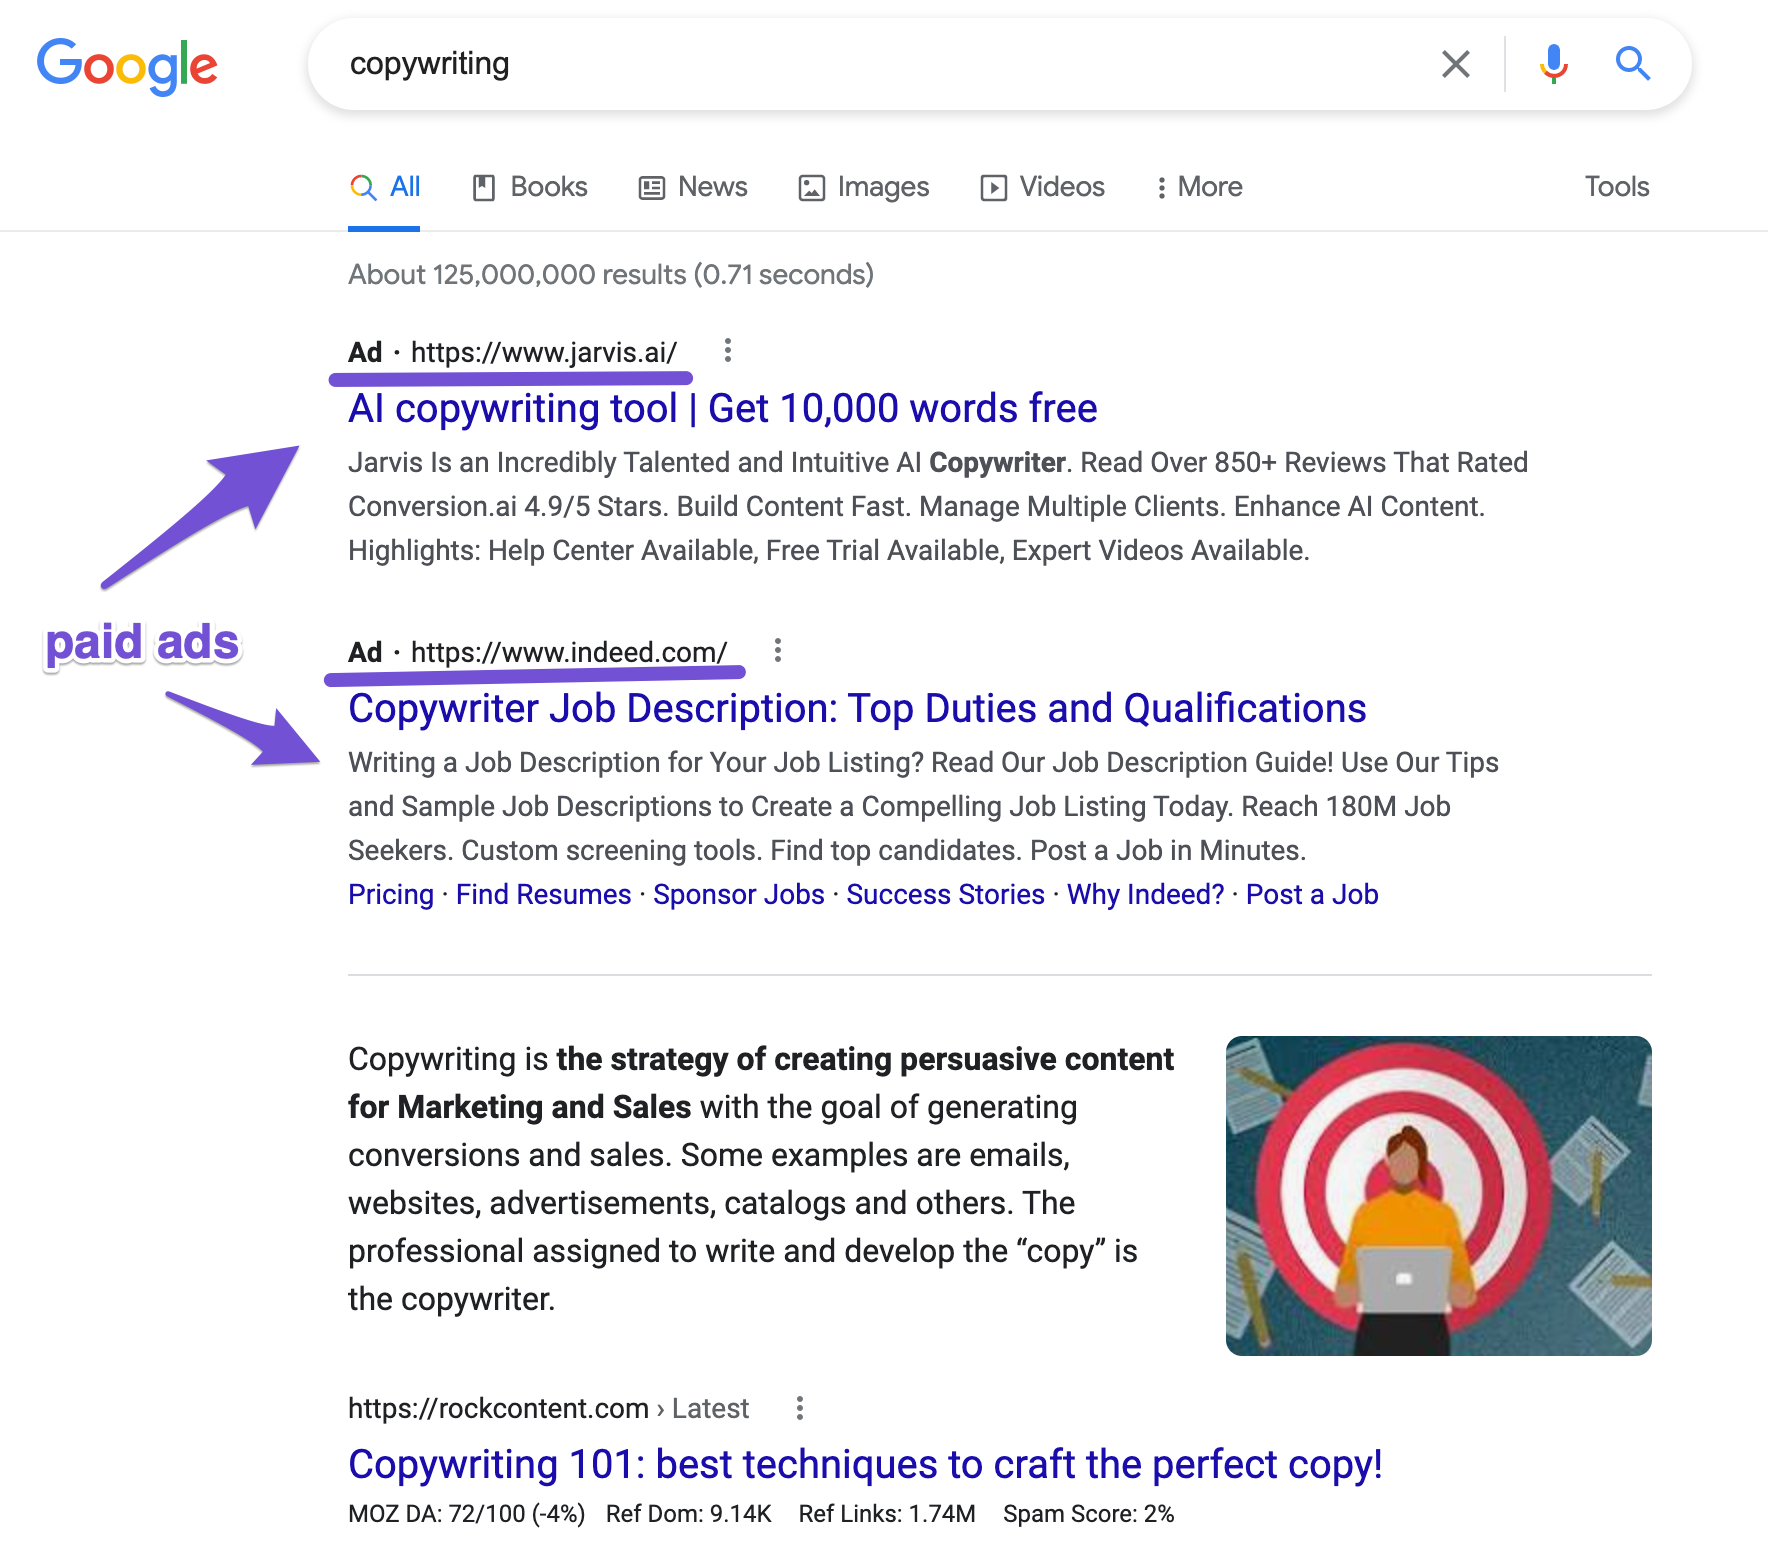 paid ads appearing in serps